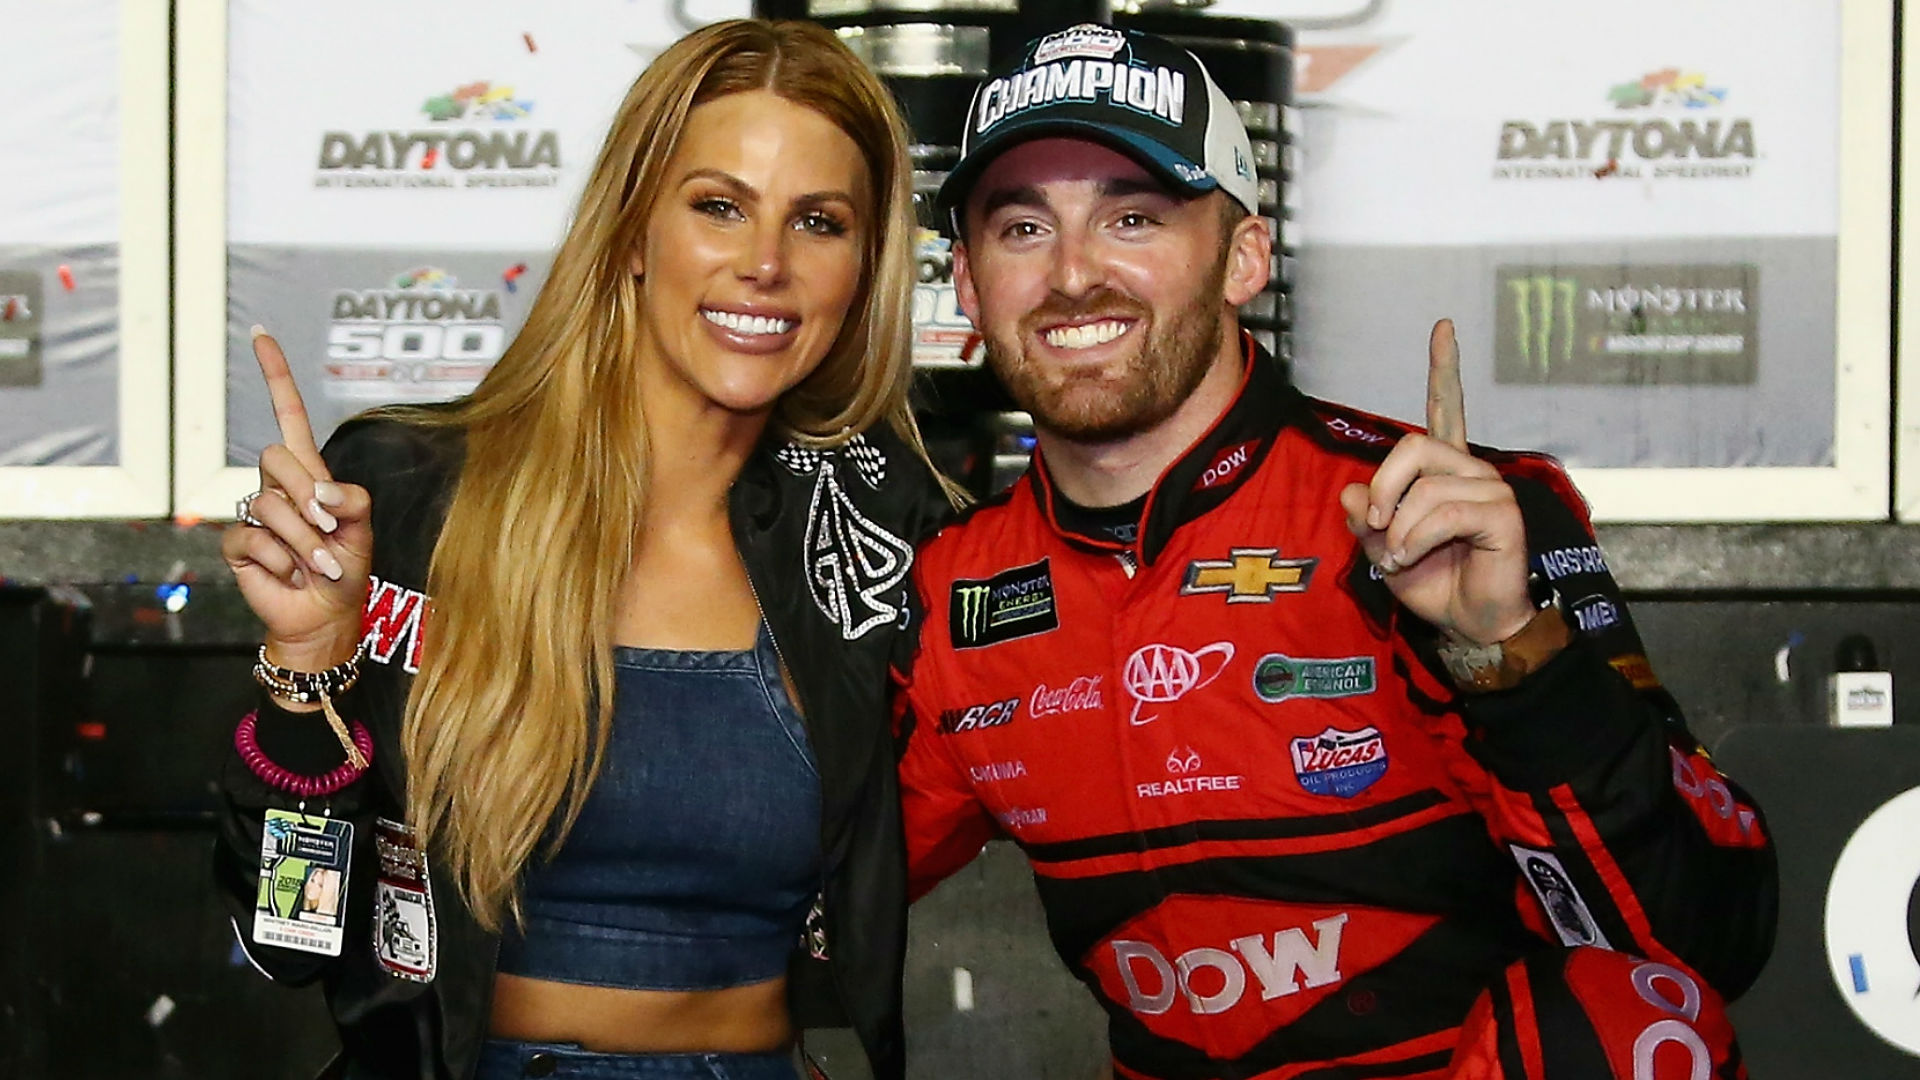 Daytona 500: Only Austin Dillon’s wife will be able to see strategically placed celebratory tattoo